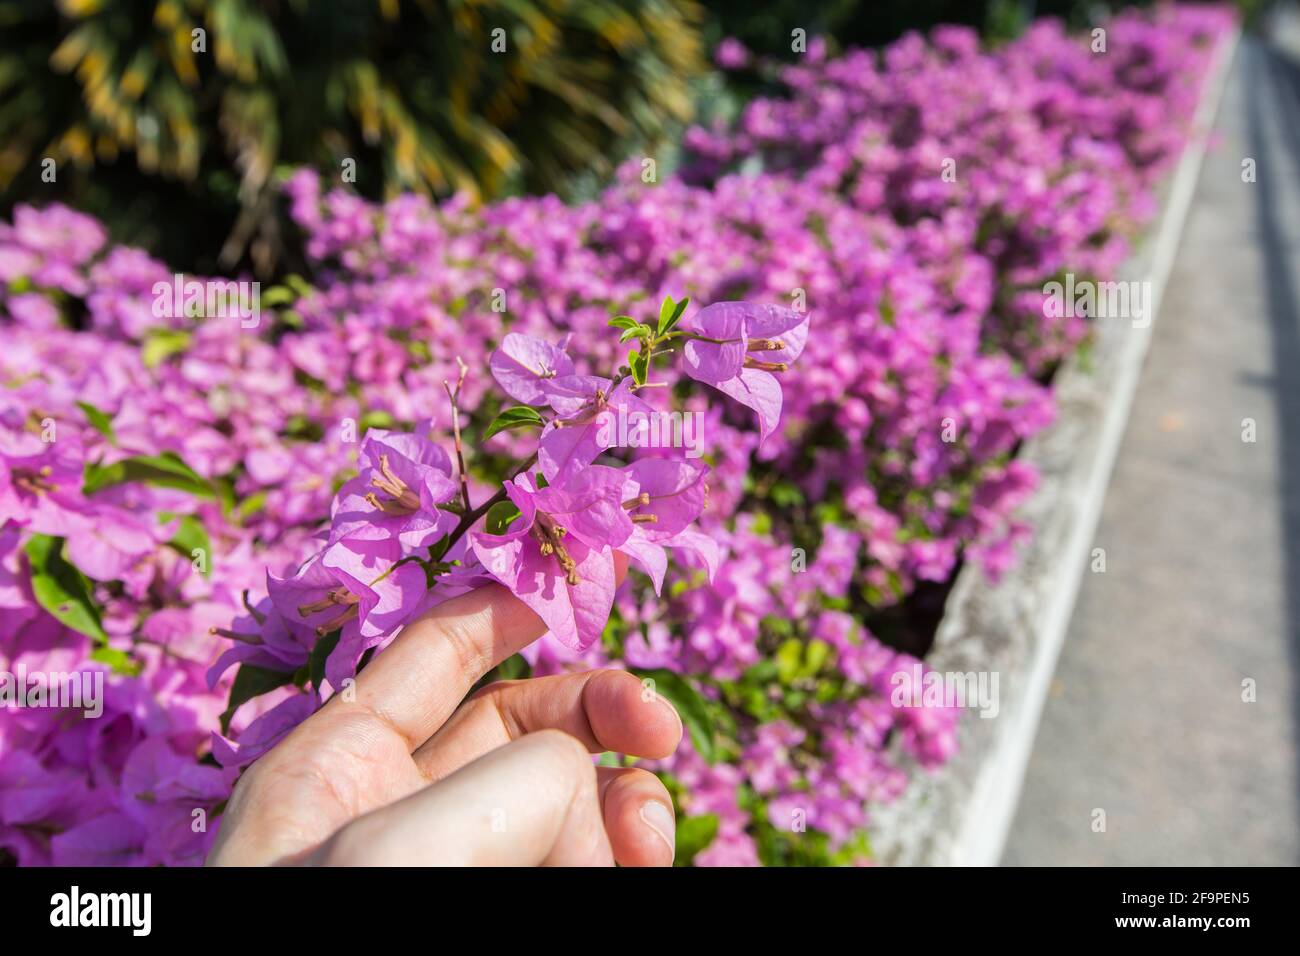 Index finger touching and feeling the texture of bougainvillea plant at outdoor space setting. Stock Photo